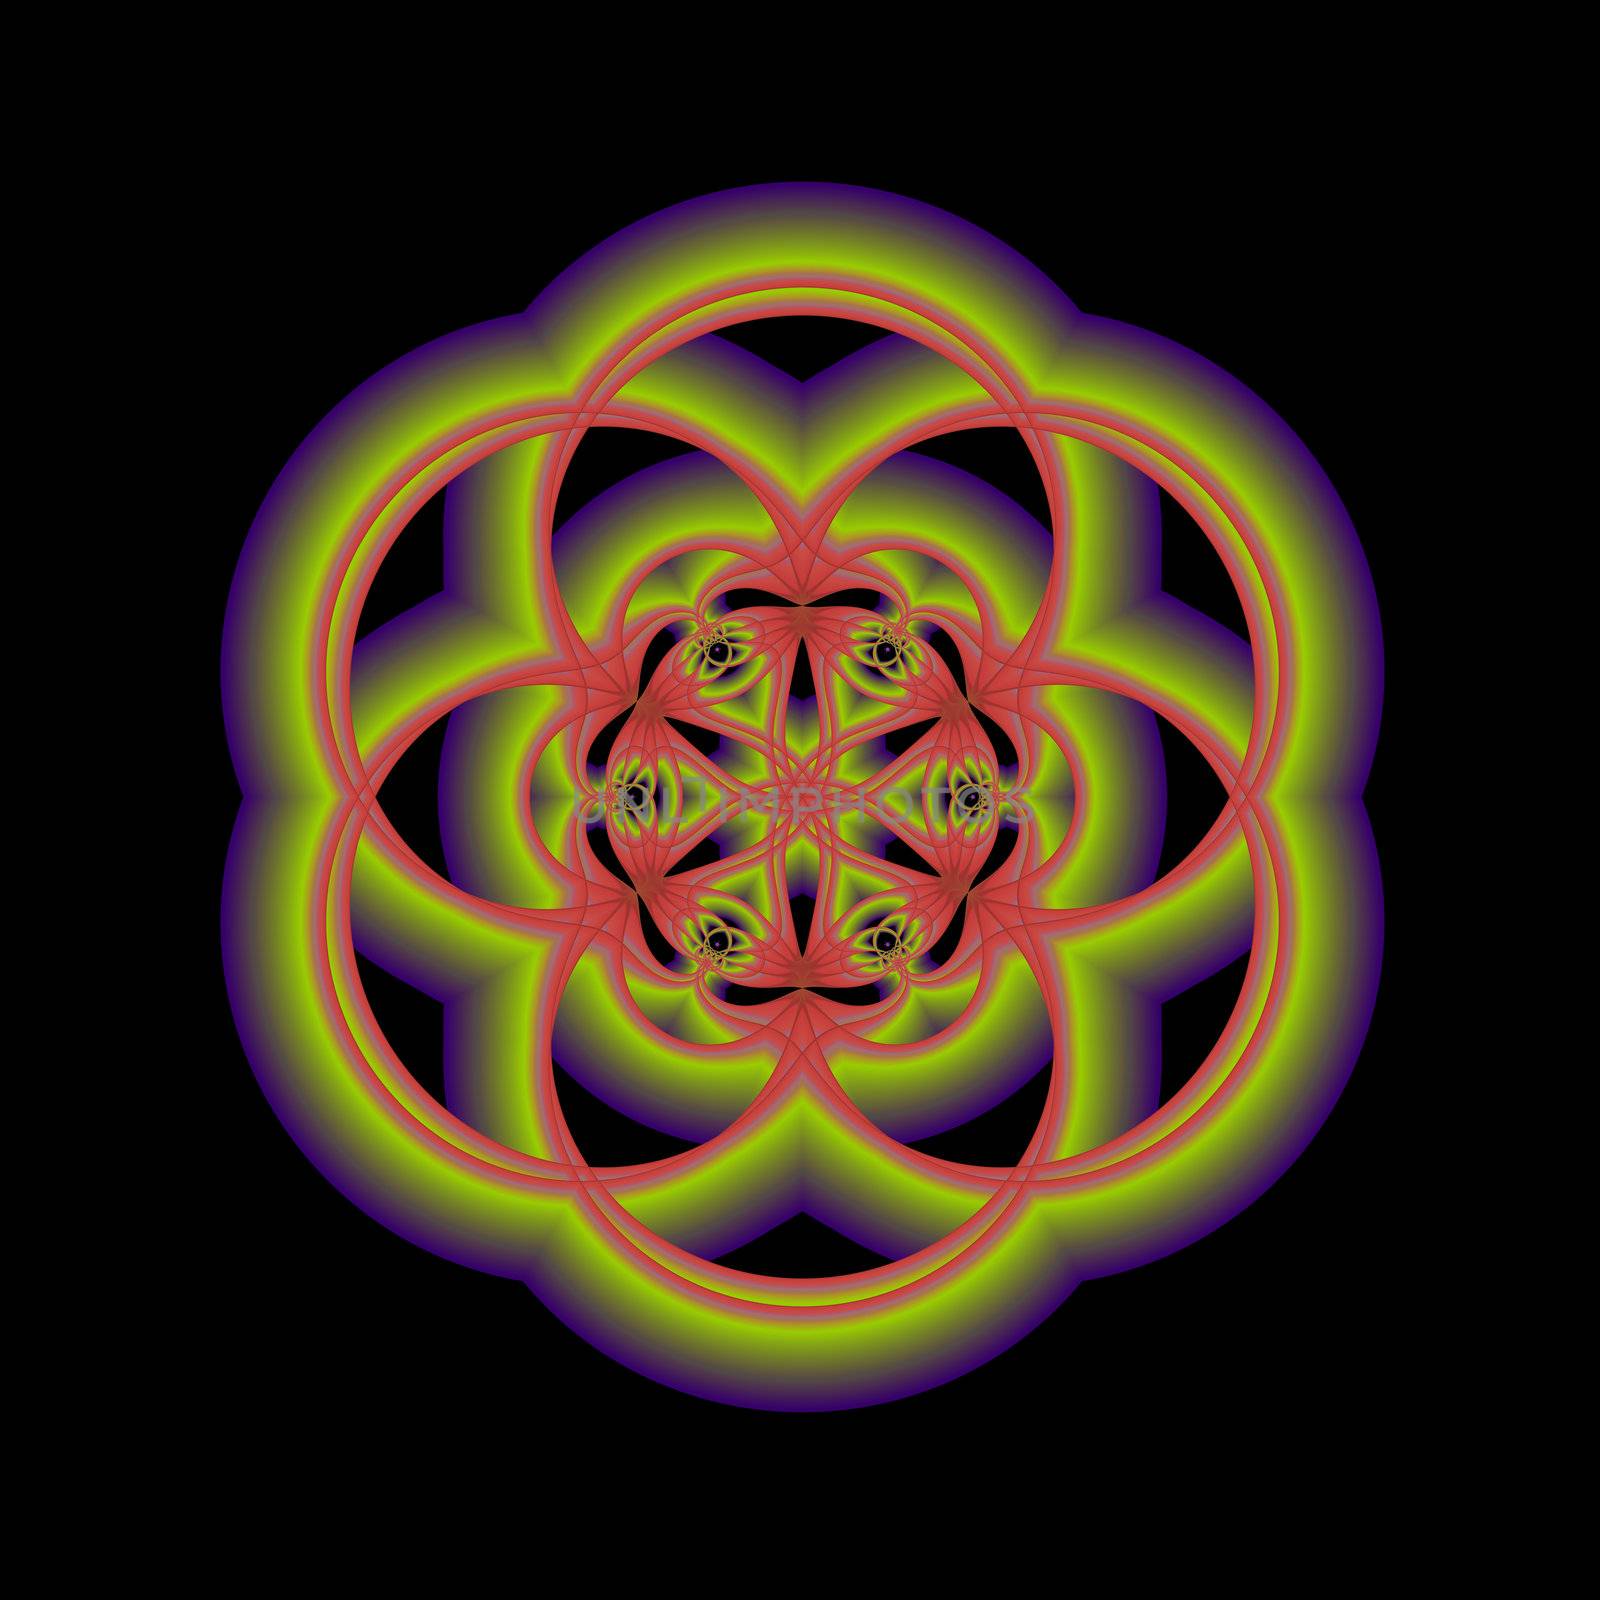 An abstract fractal done in shades of orange, green, and purple floating on a black background. It is an abstract rendering of growth and life done is a mandala shape.